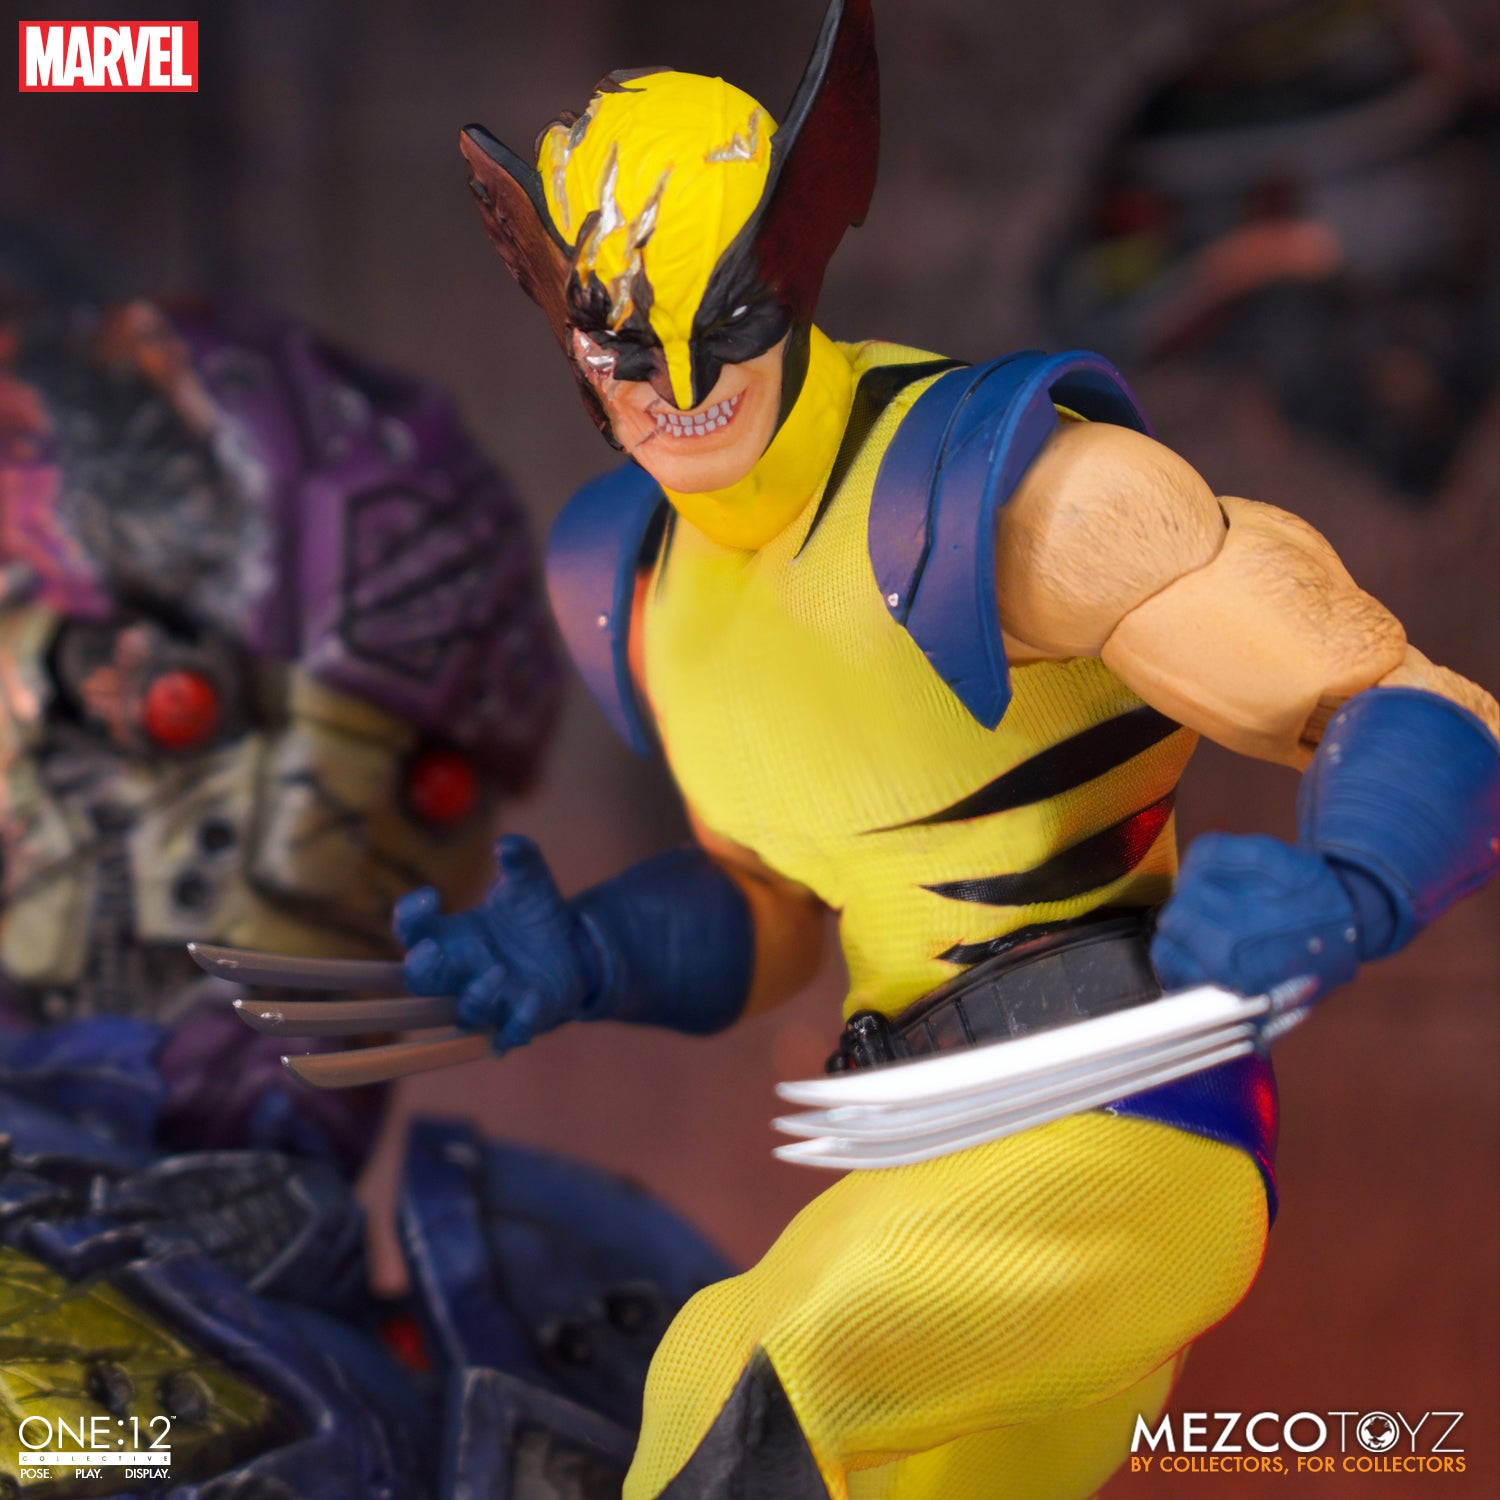 Mezco One:12 Collective Classic Tiger Stripe Wolverine NYCC Exclusive